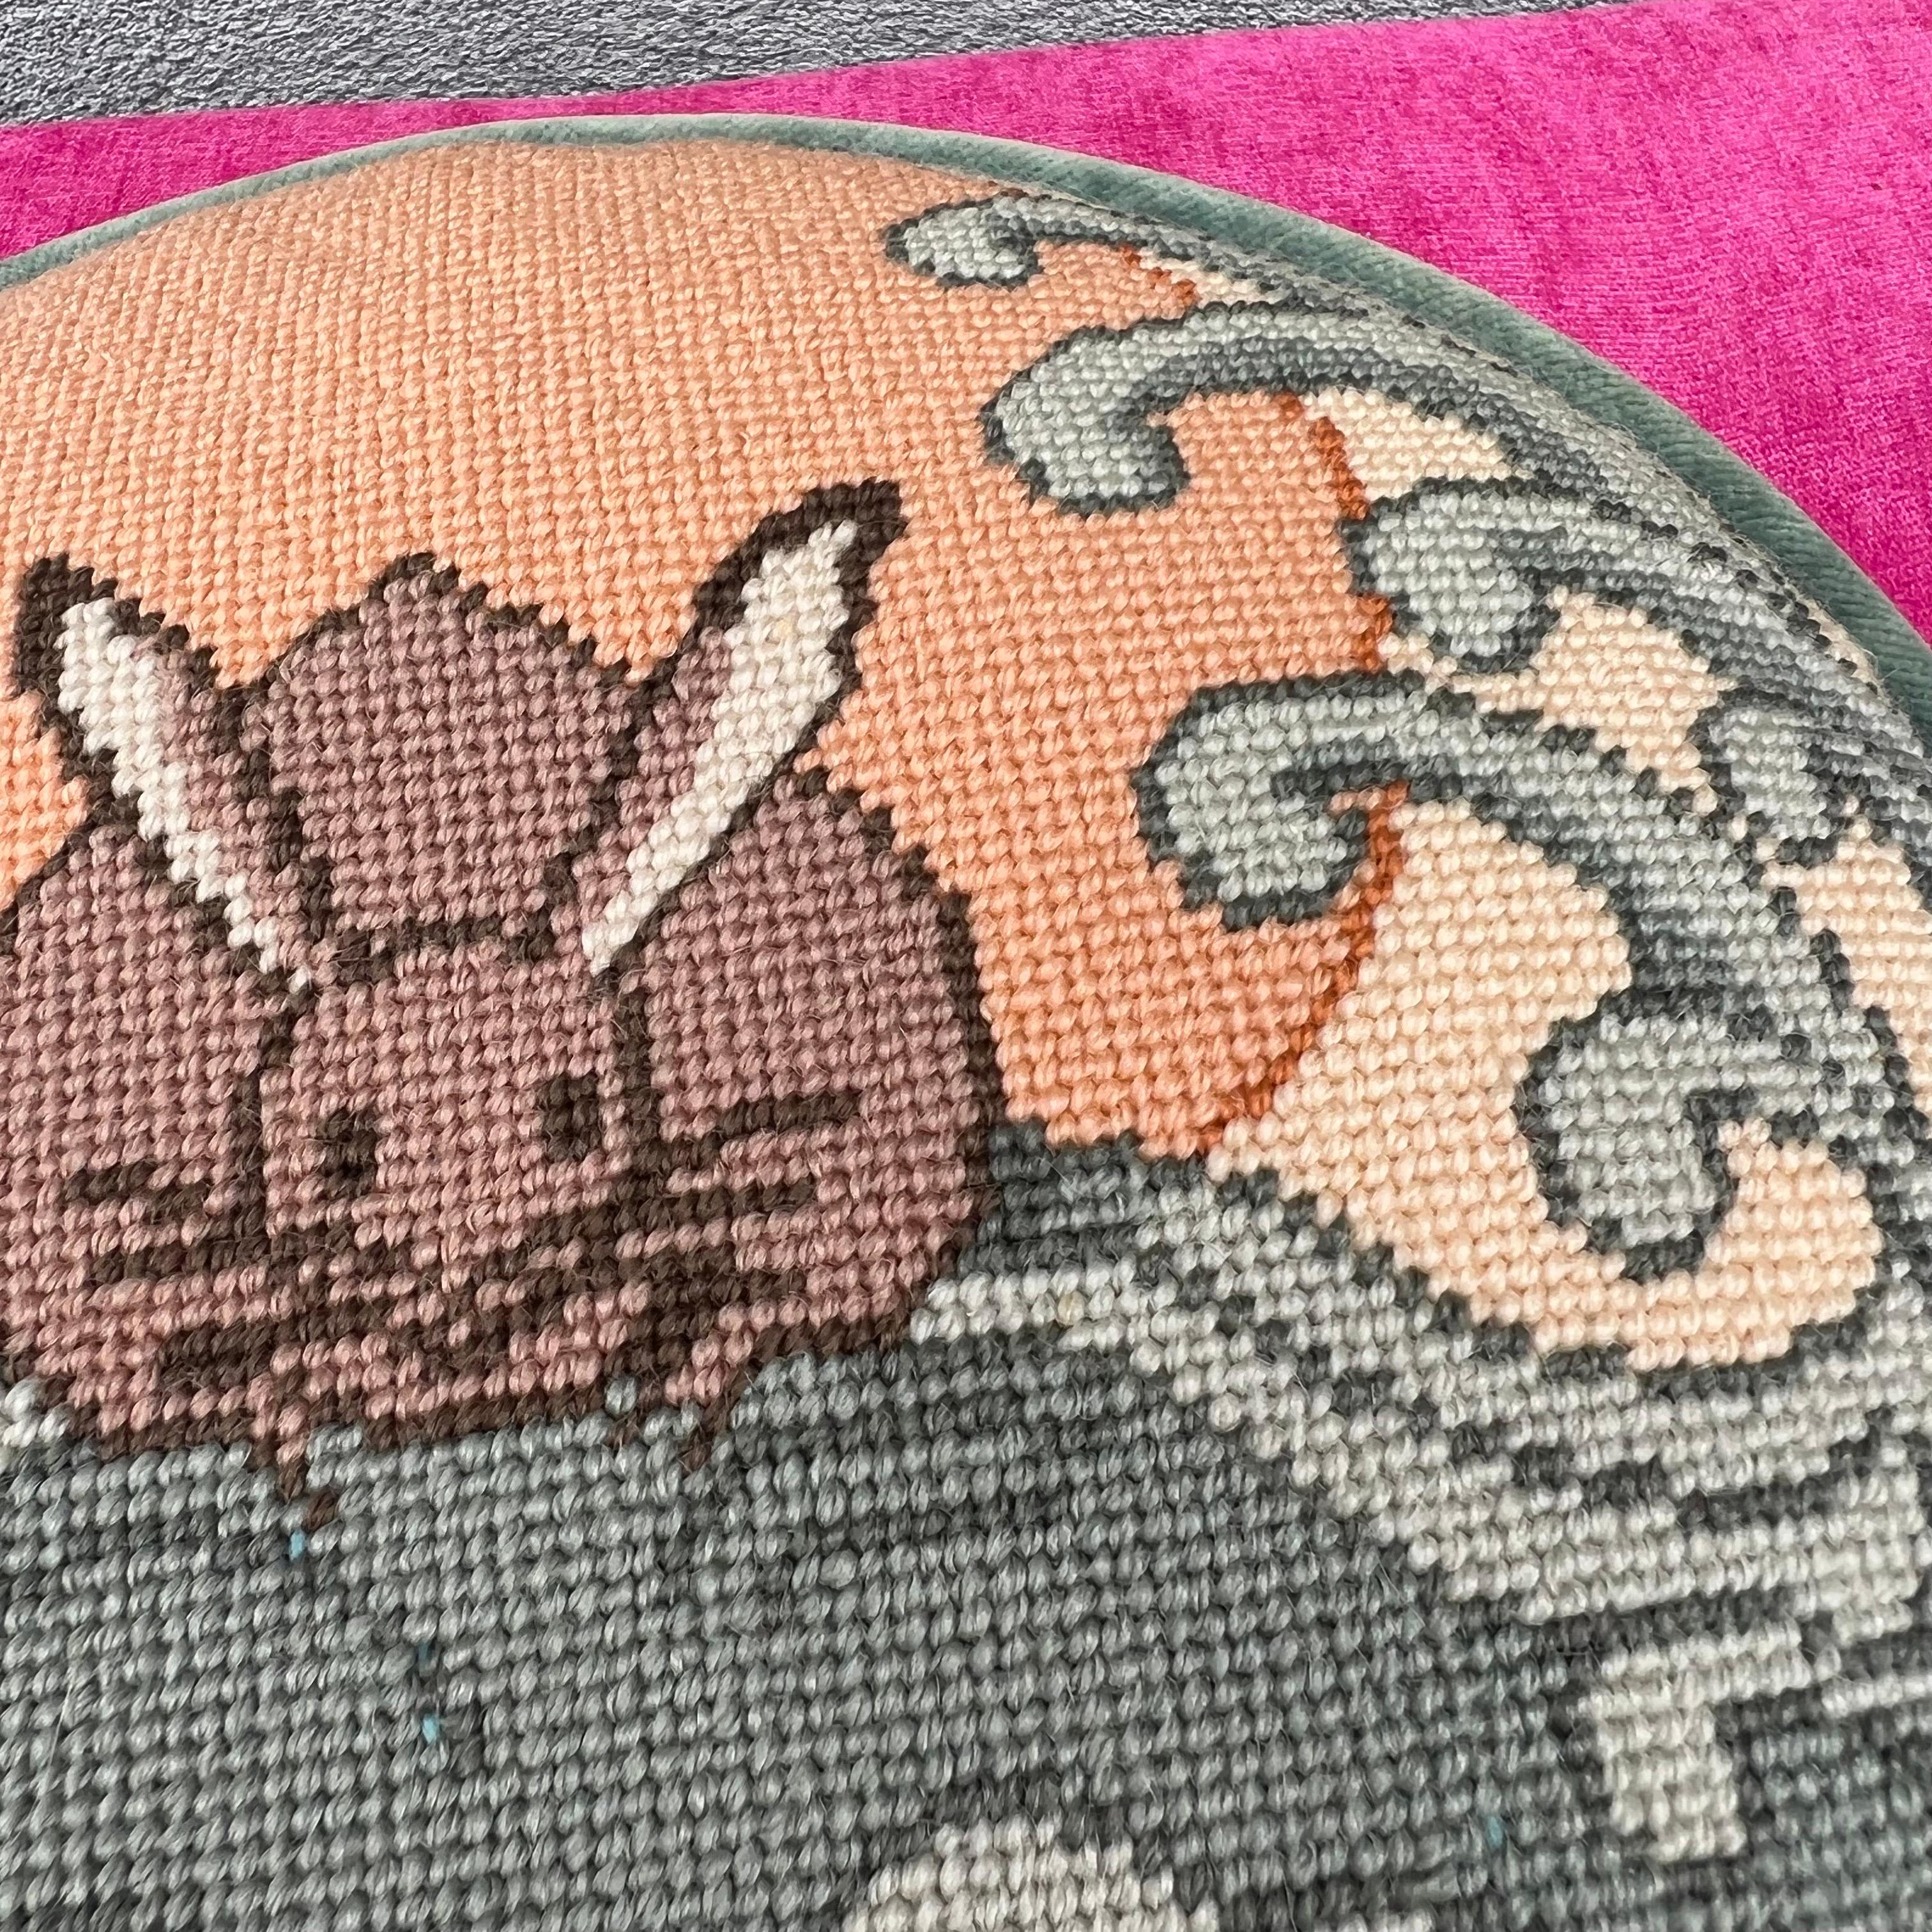 This might be my favorite find of the season! The prettiest vintage needlepoint bunny/hare pillow. The colors are very Art Deco/art Nuevo. The backing is a blue velvet.